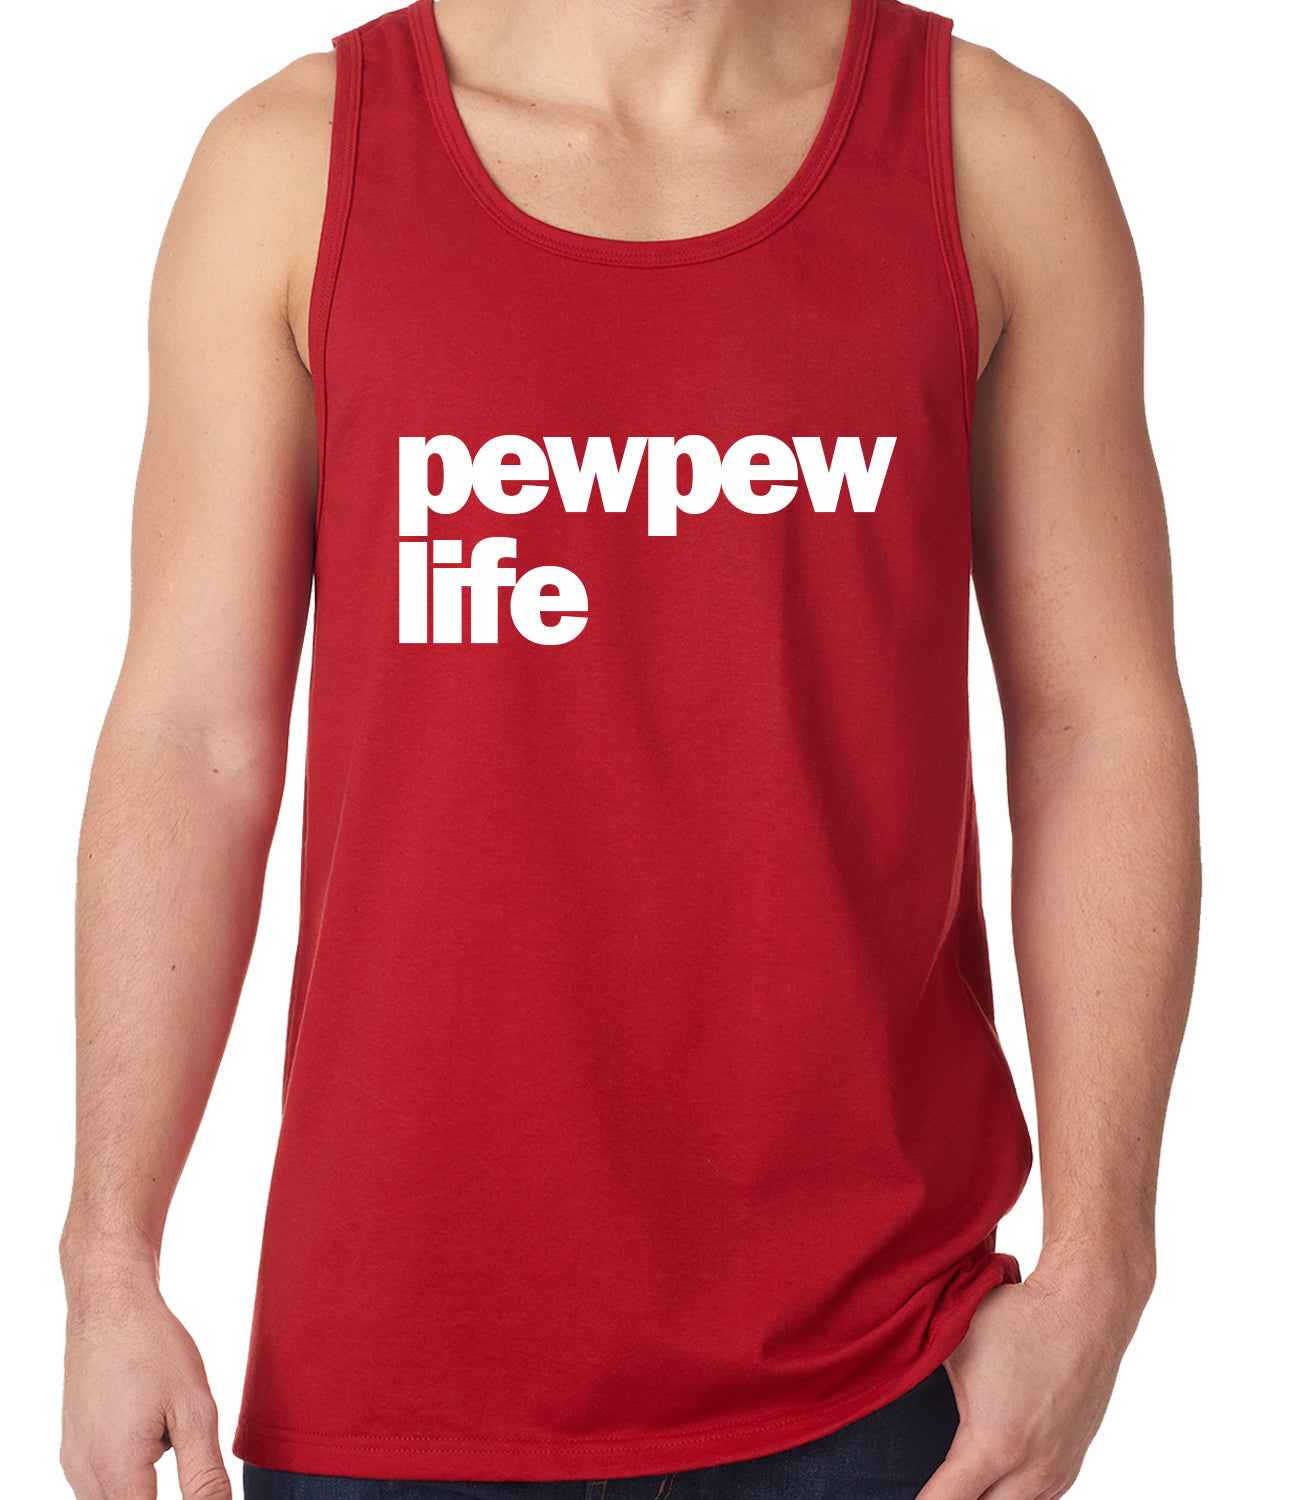 The Pew Pew Life Tank Top